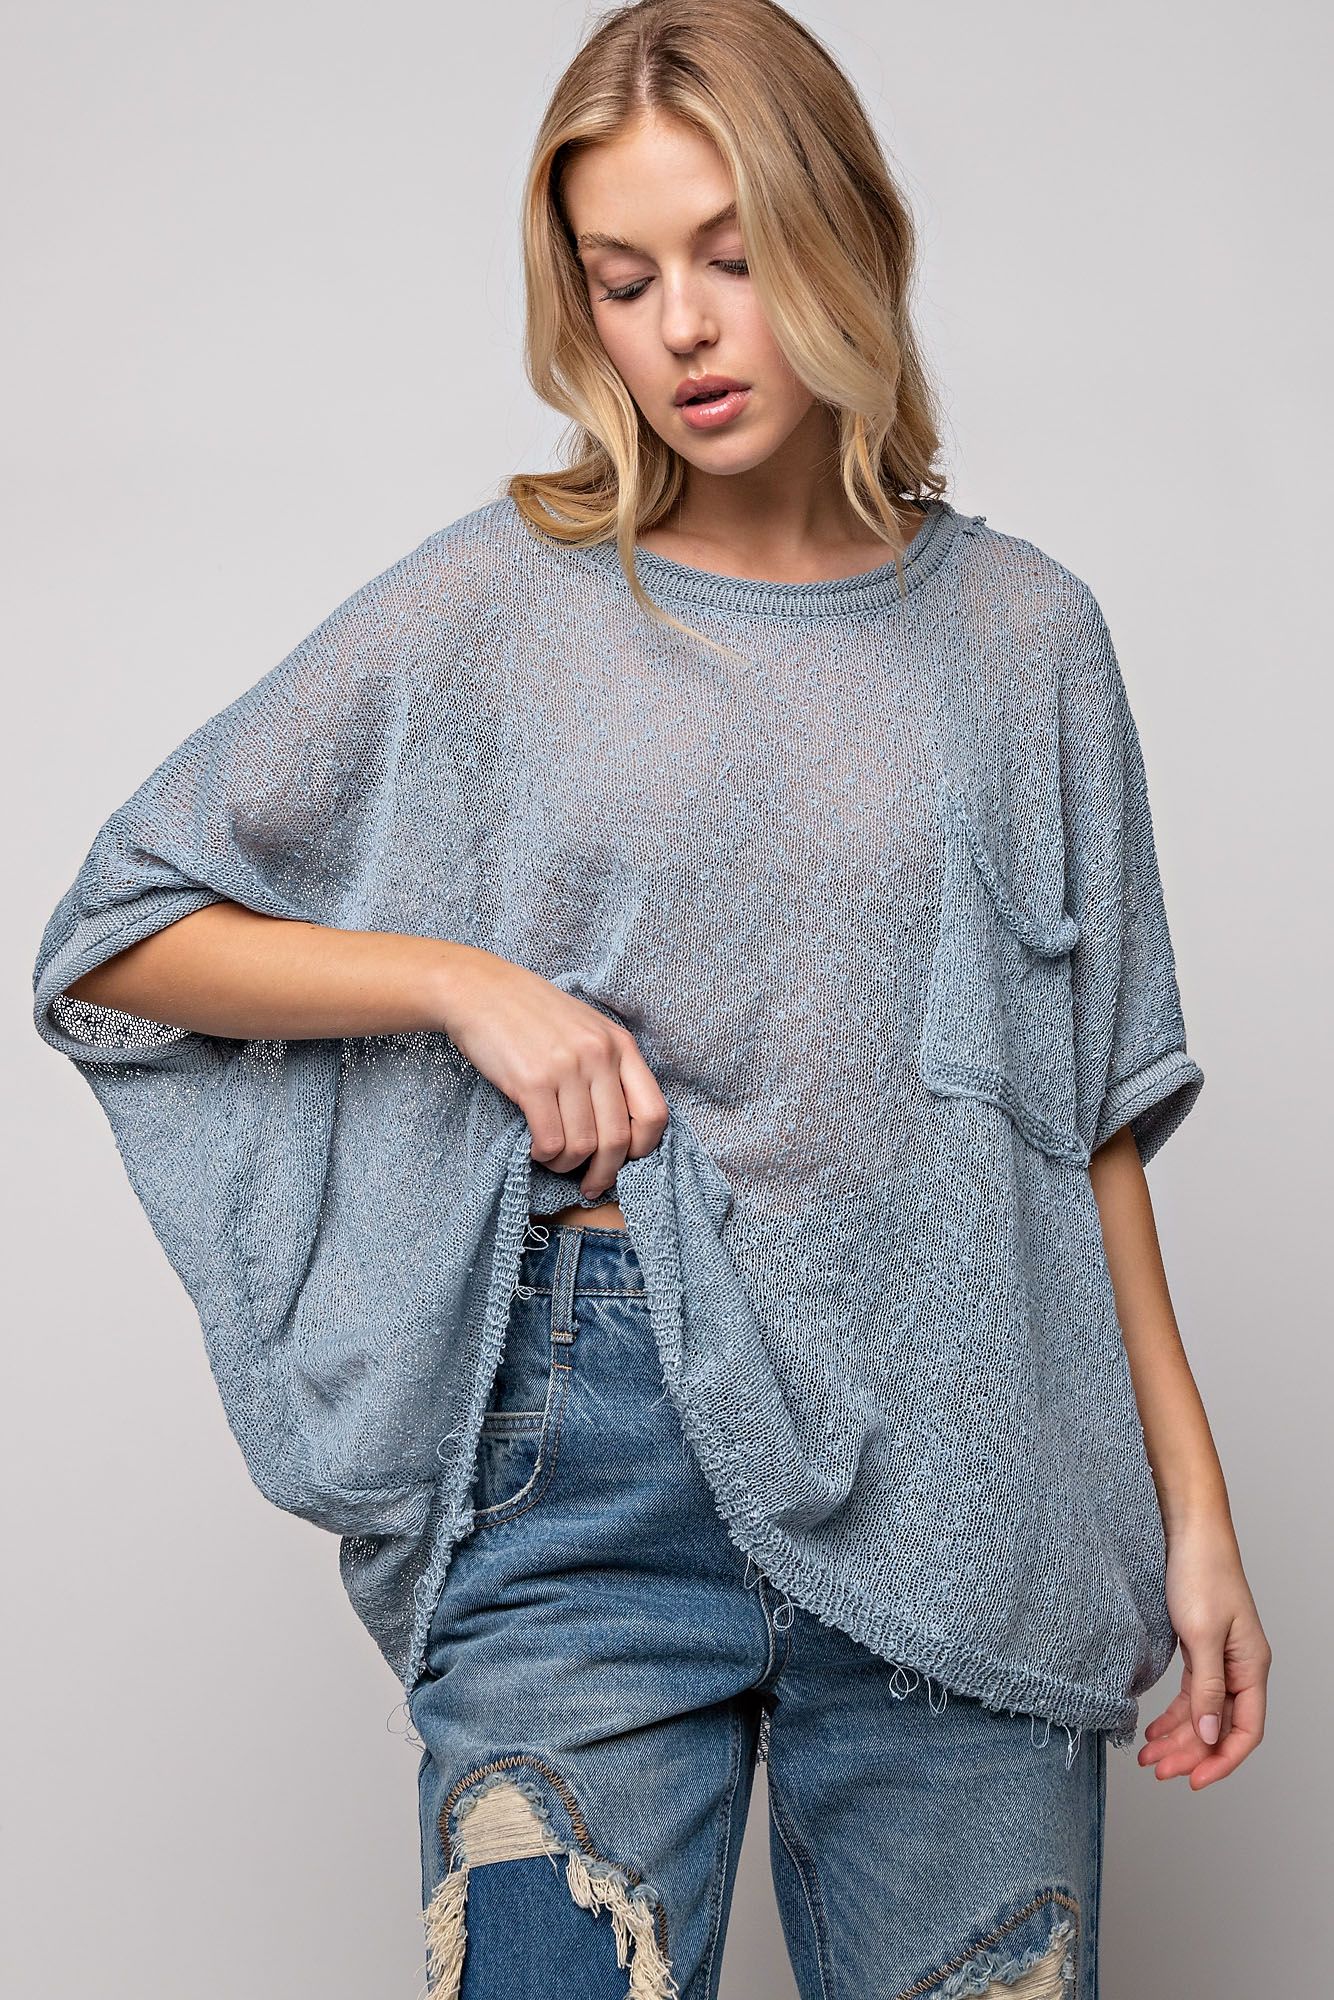 Easel Plus Dolman Sleeves Thin Boat Neck Lightweight Loose Fit Sweater - Roulhac Fashion Boutique